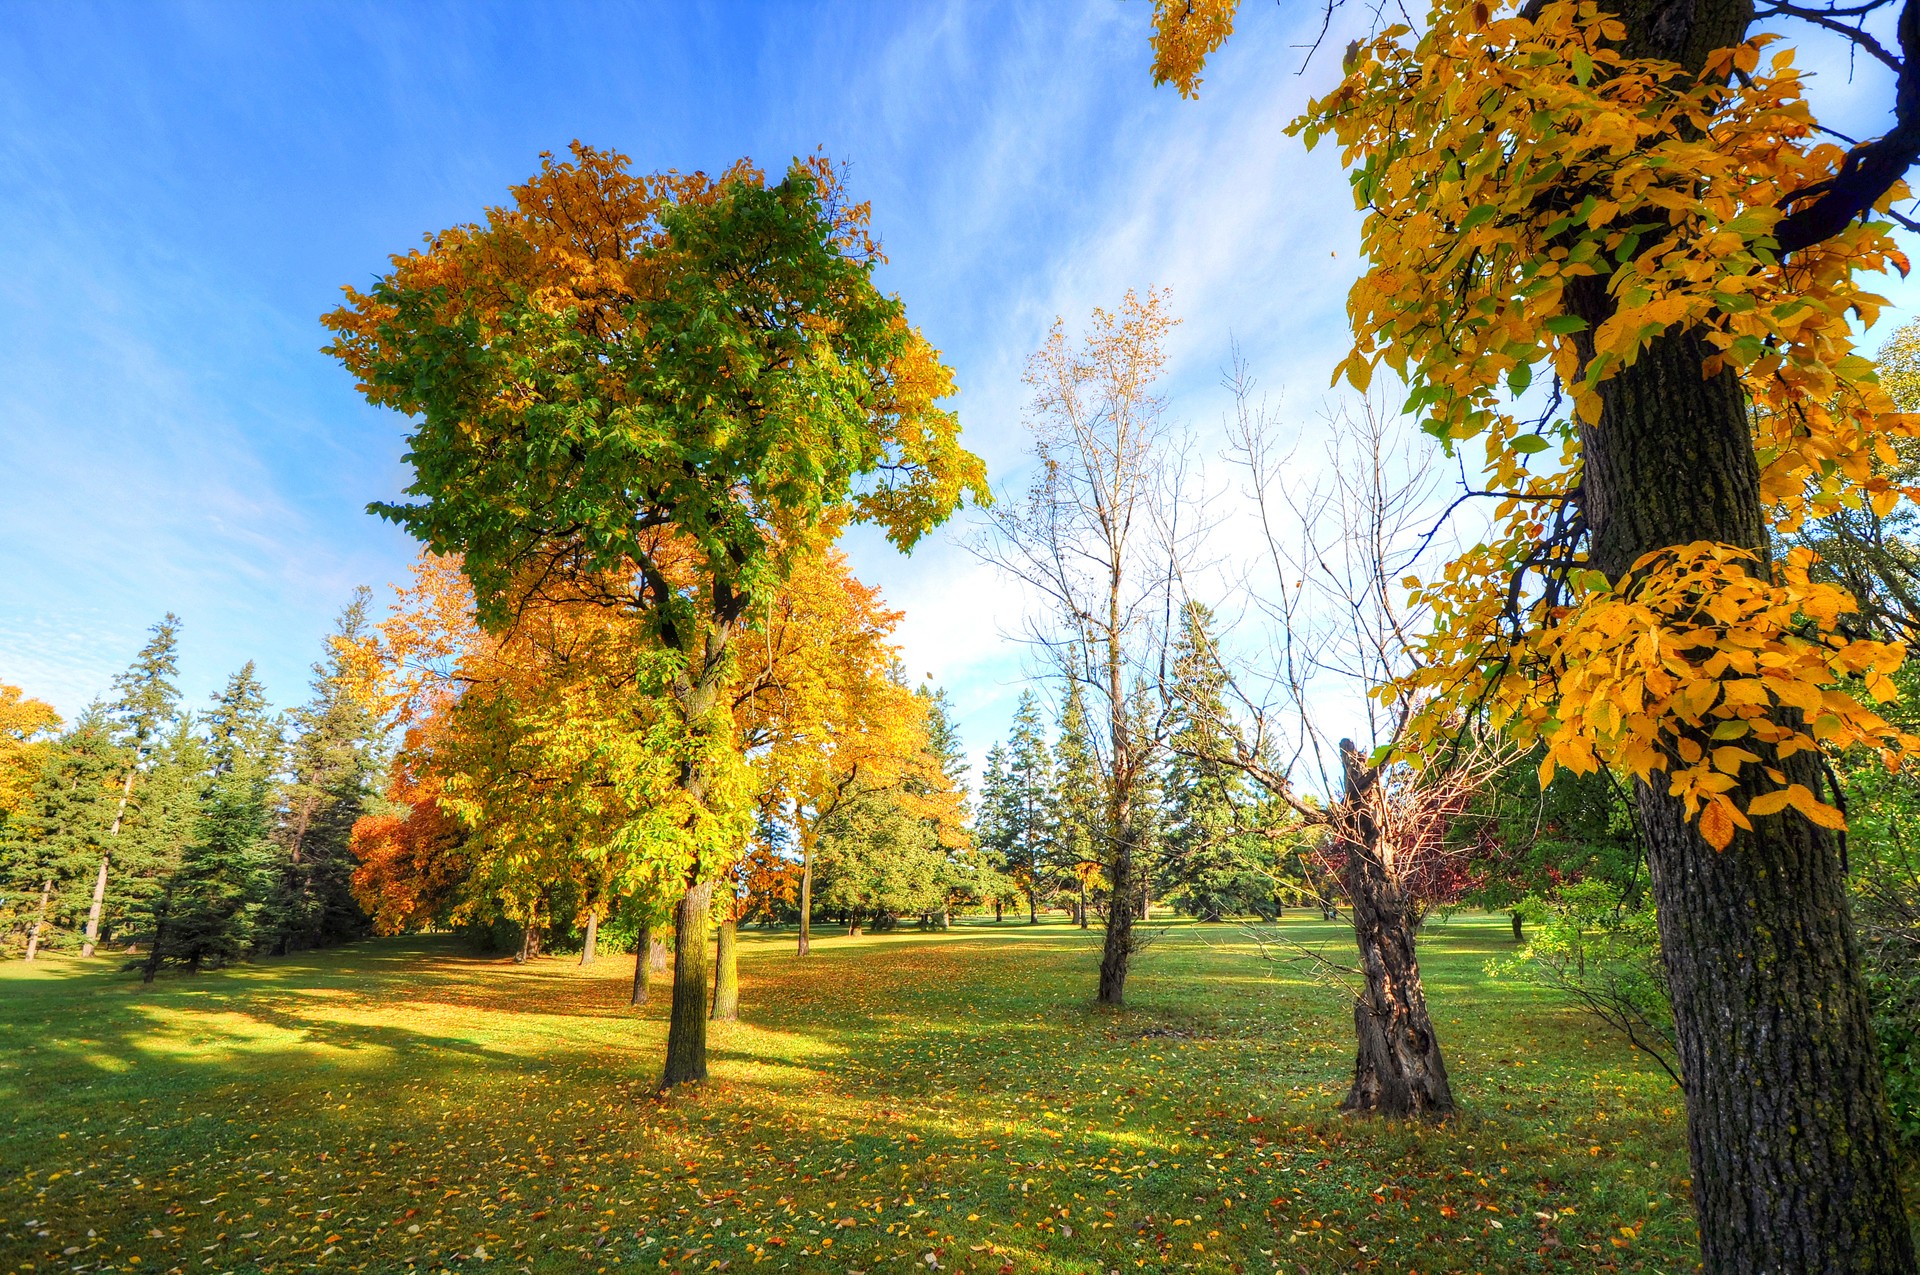 General 1920x1275 park trees plants outdoors fallen leaves fall lawns vibrant